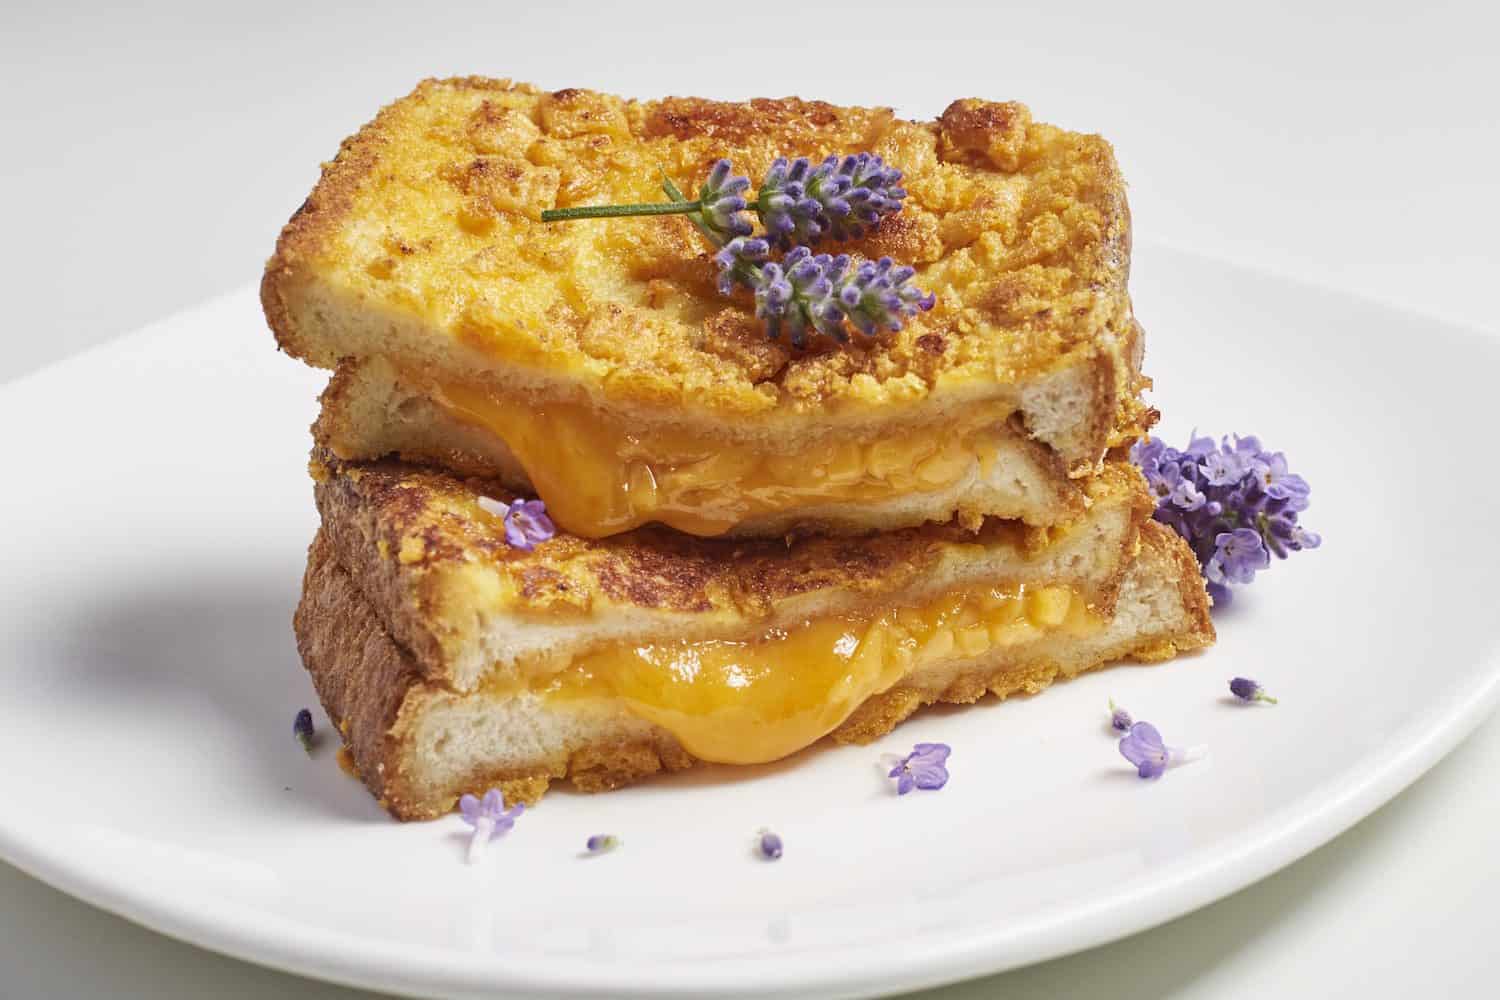 Captain Crunch Crusted Grilled Cheese